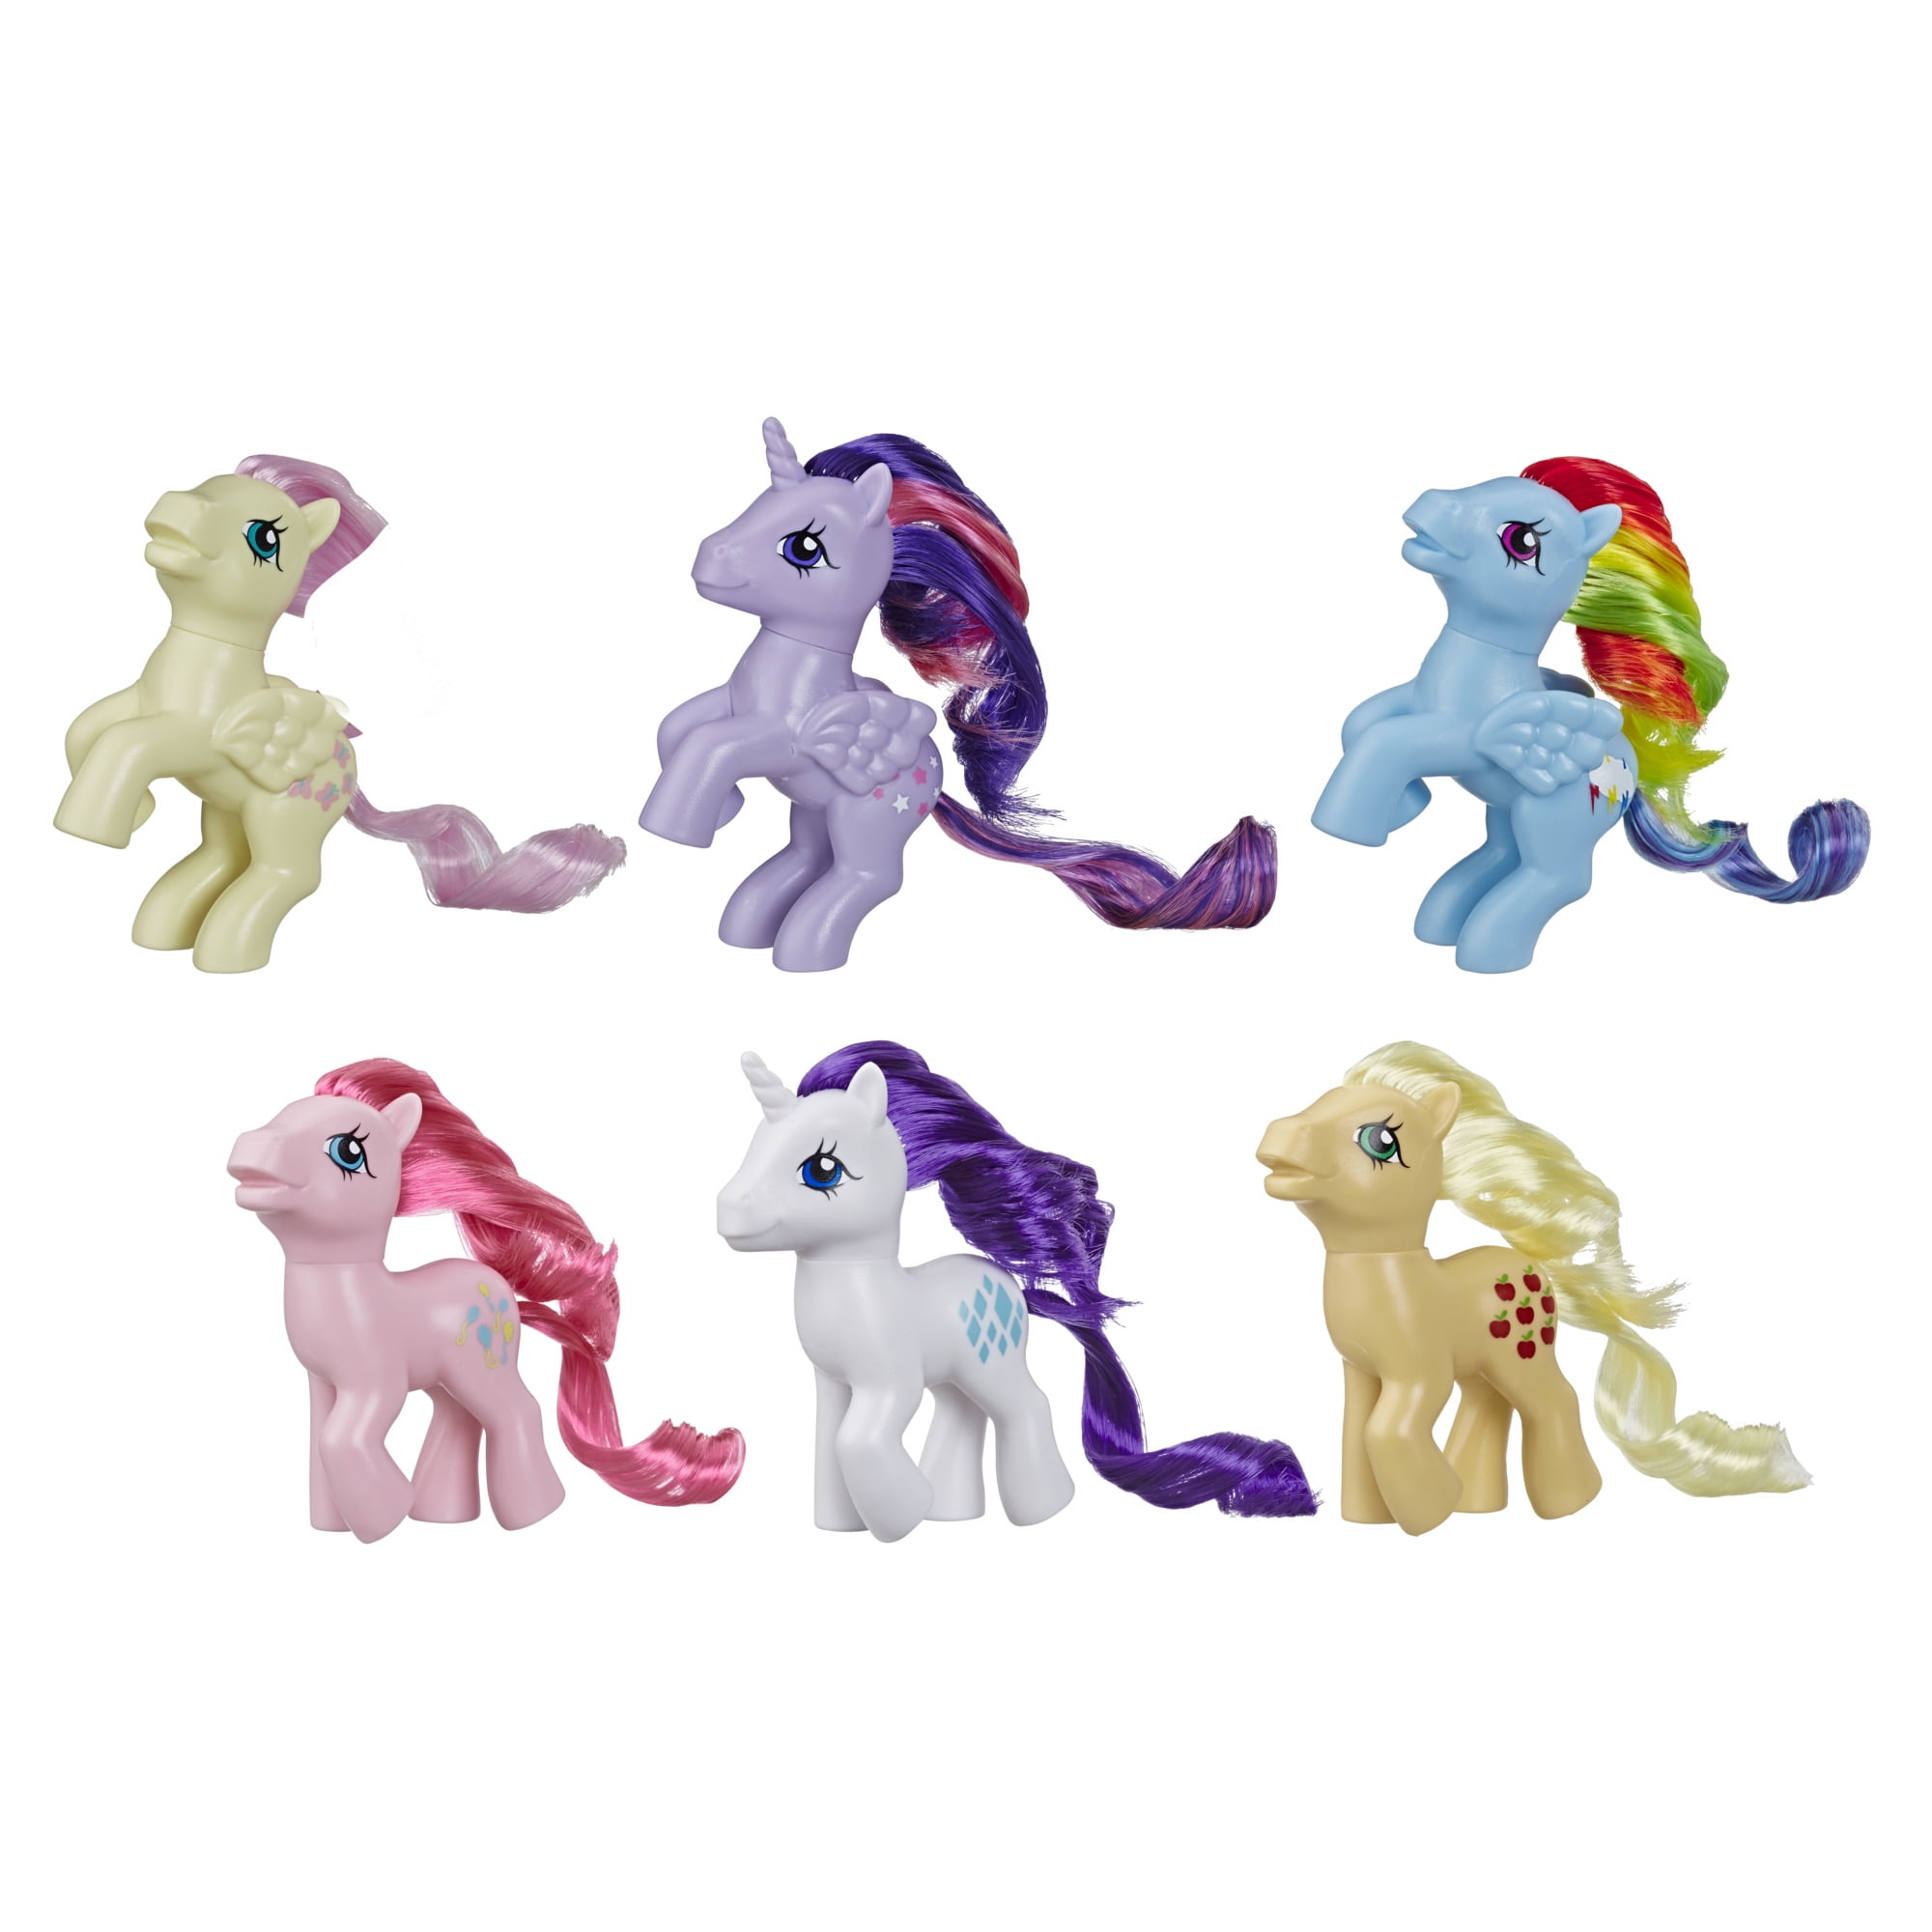 80s-Inspired Collectable Figures with Retro Styling; 6 3-Inch Toys My Little Pony Retro Rainbow Mane 6 Exclusive 